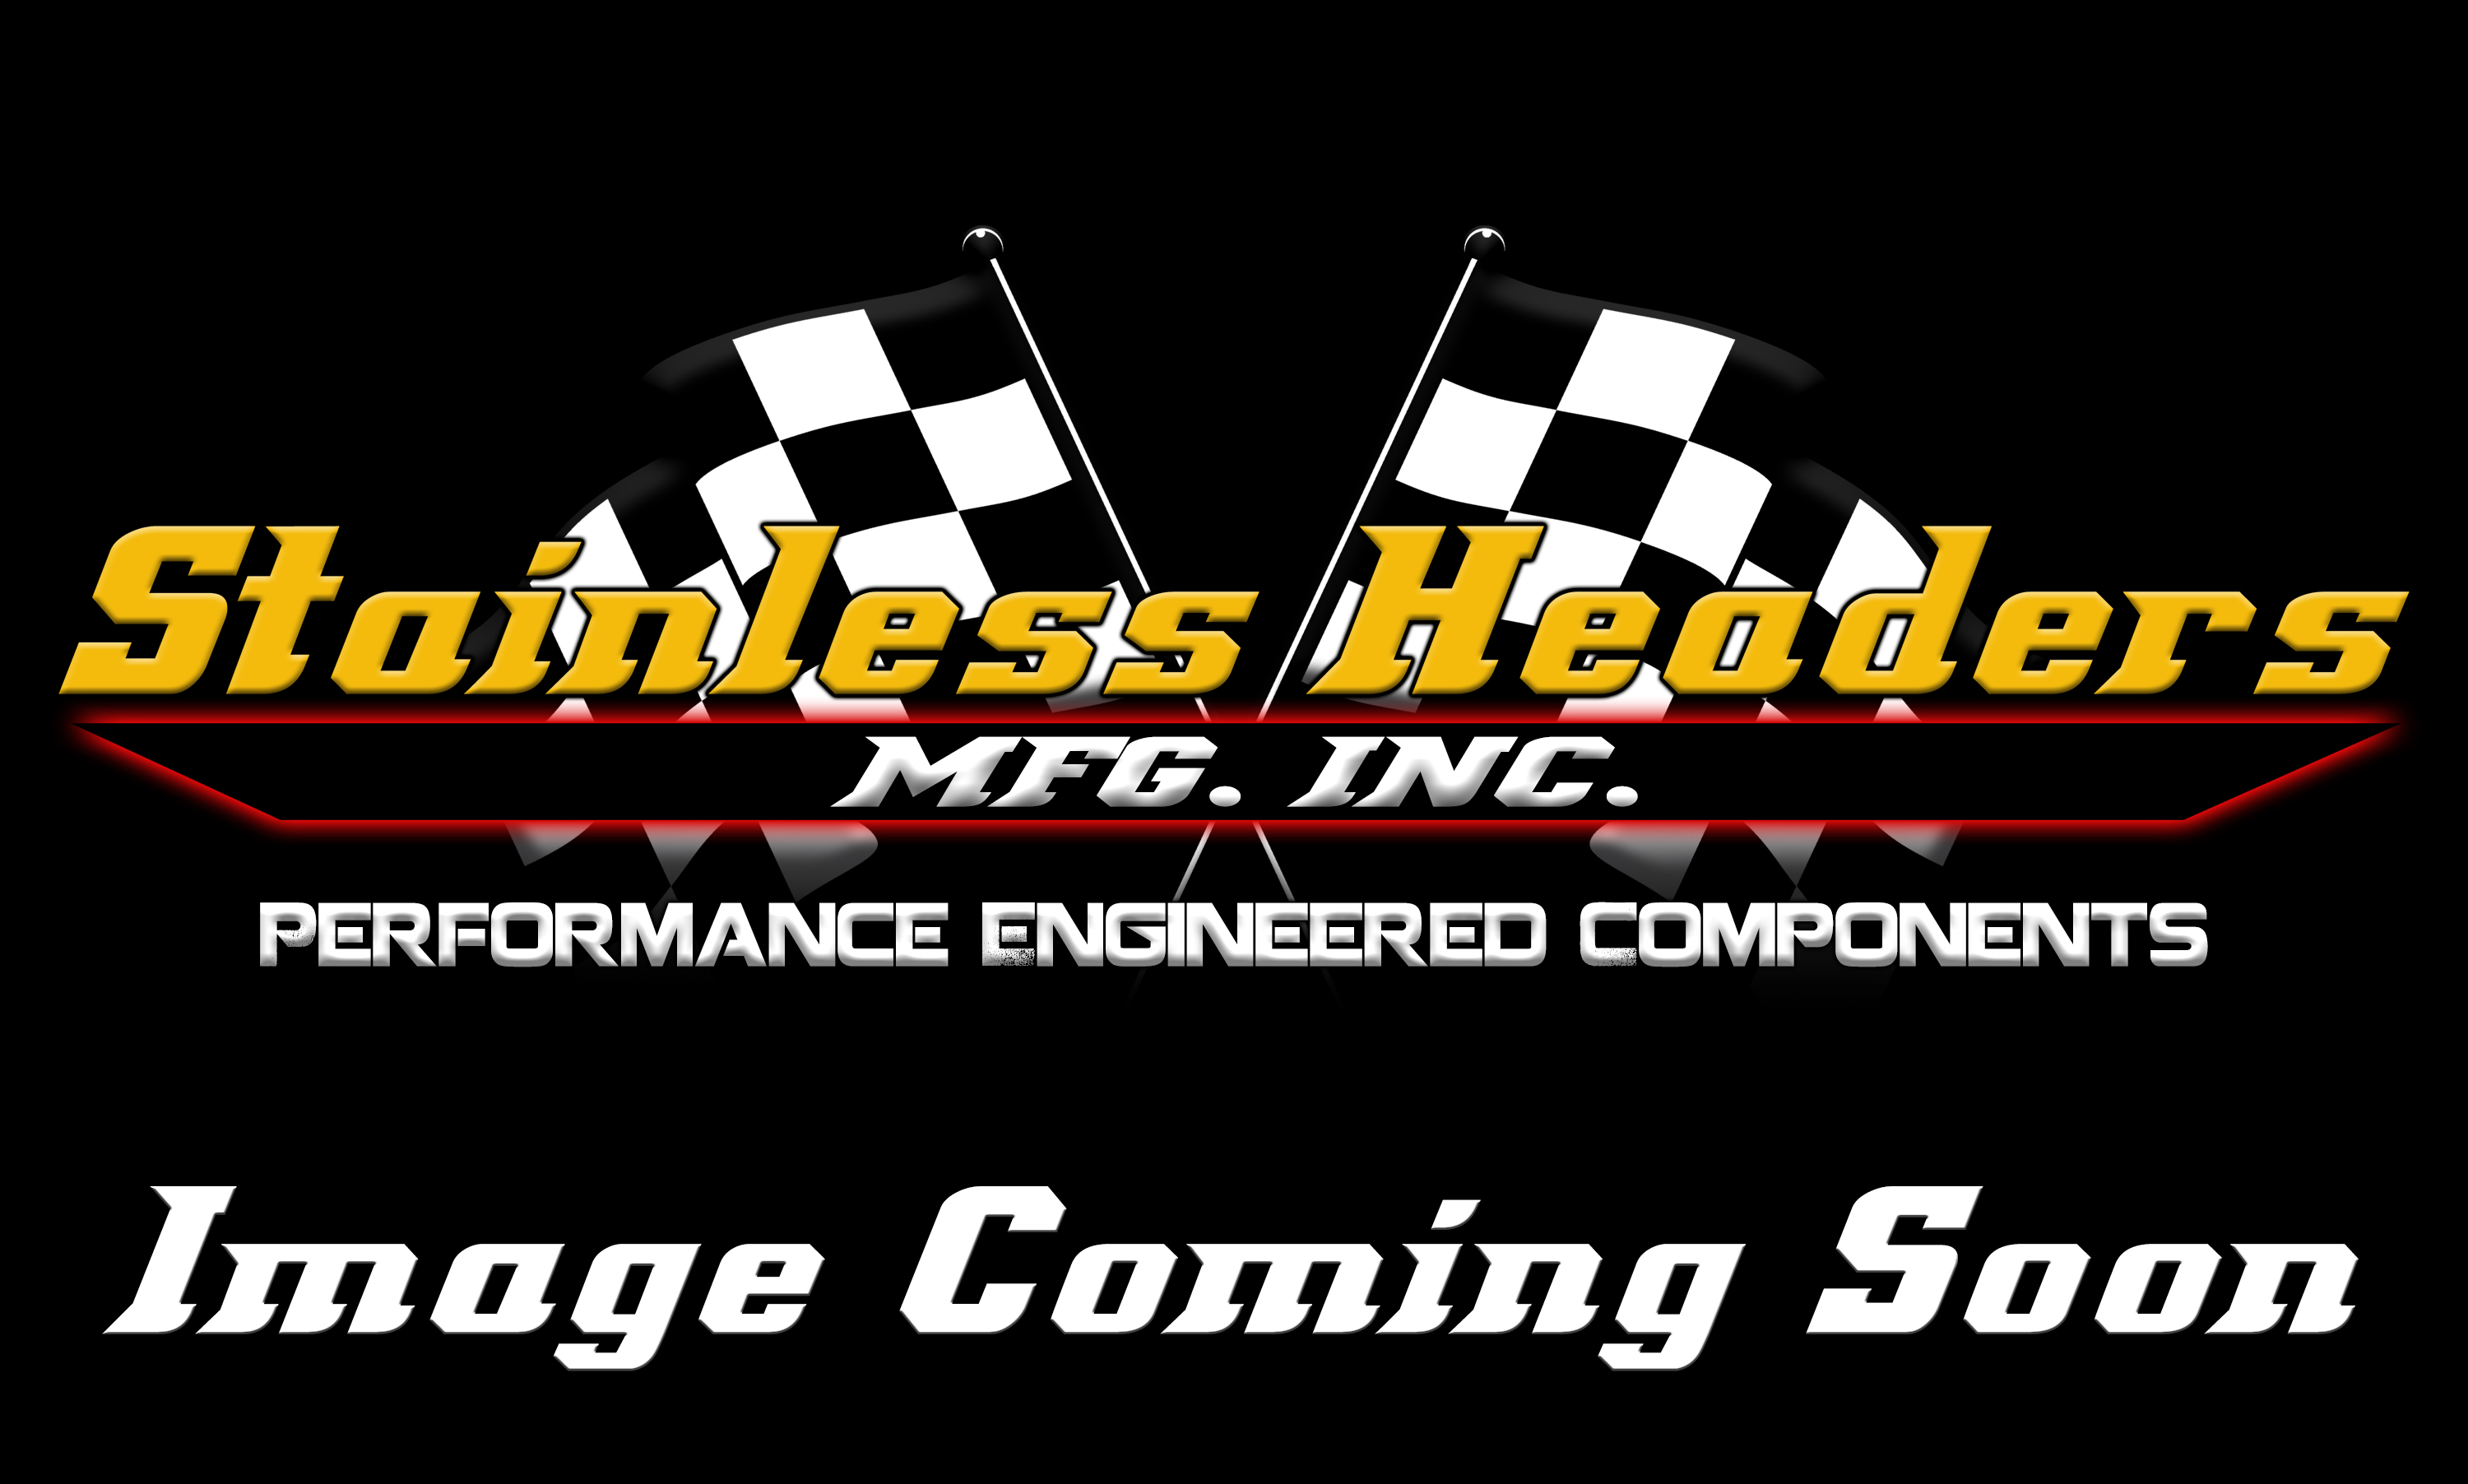 Stainless Headers - 1 5/8" Primary 3 into 1 Performance Merge Collector-16ga 304ss